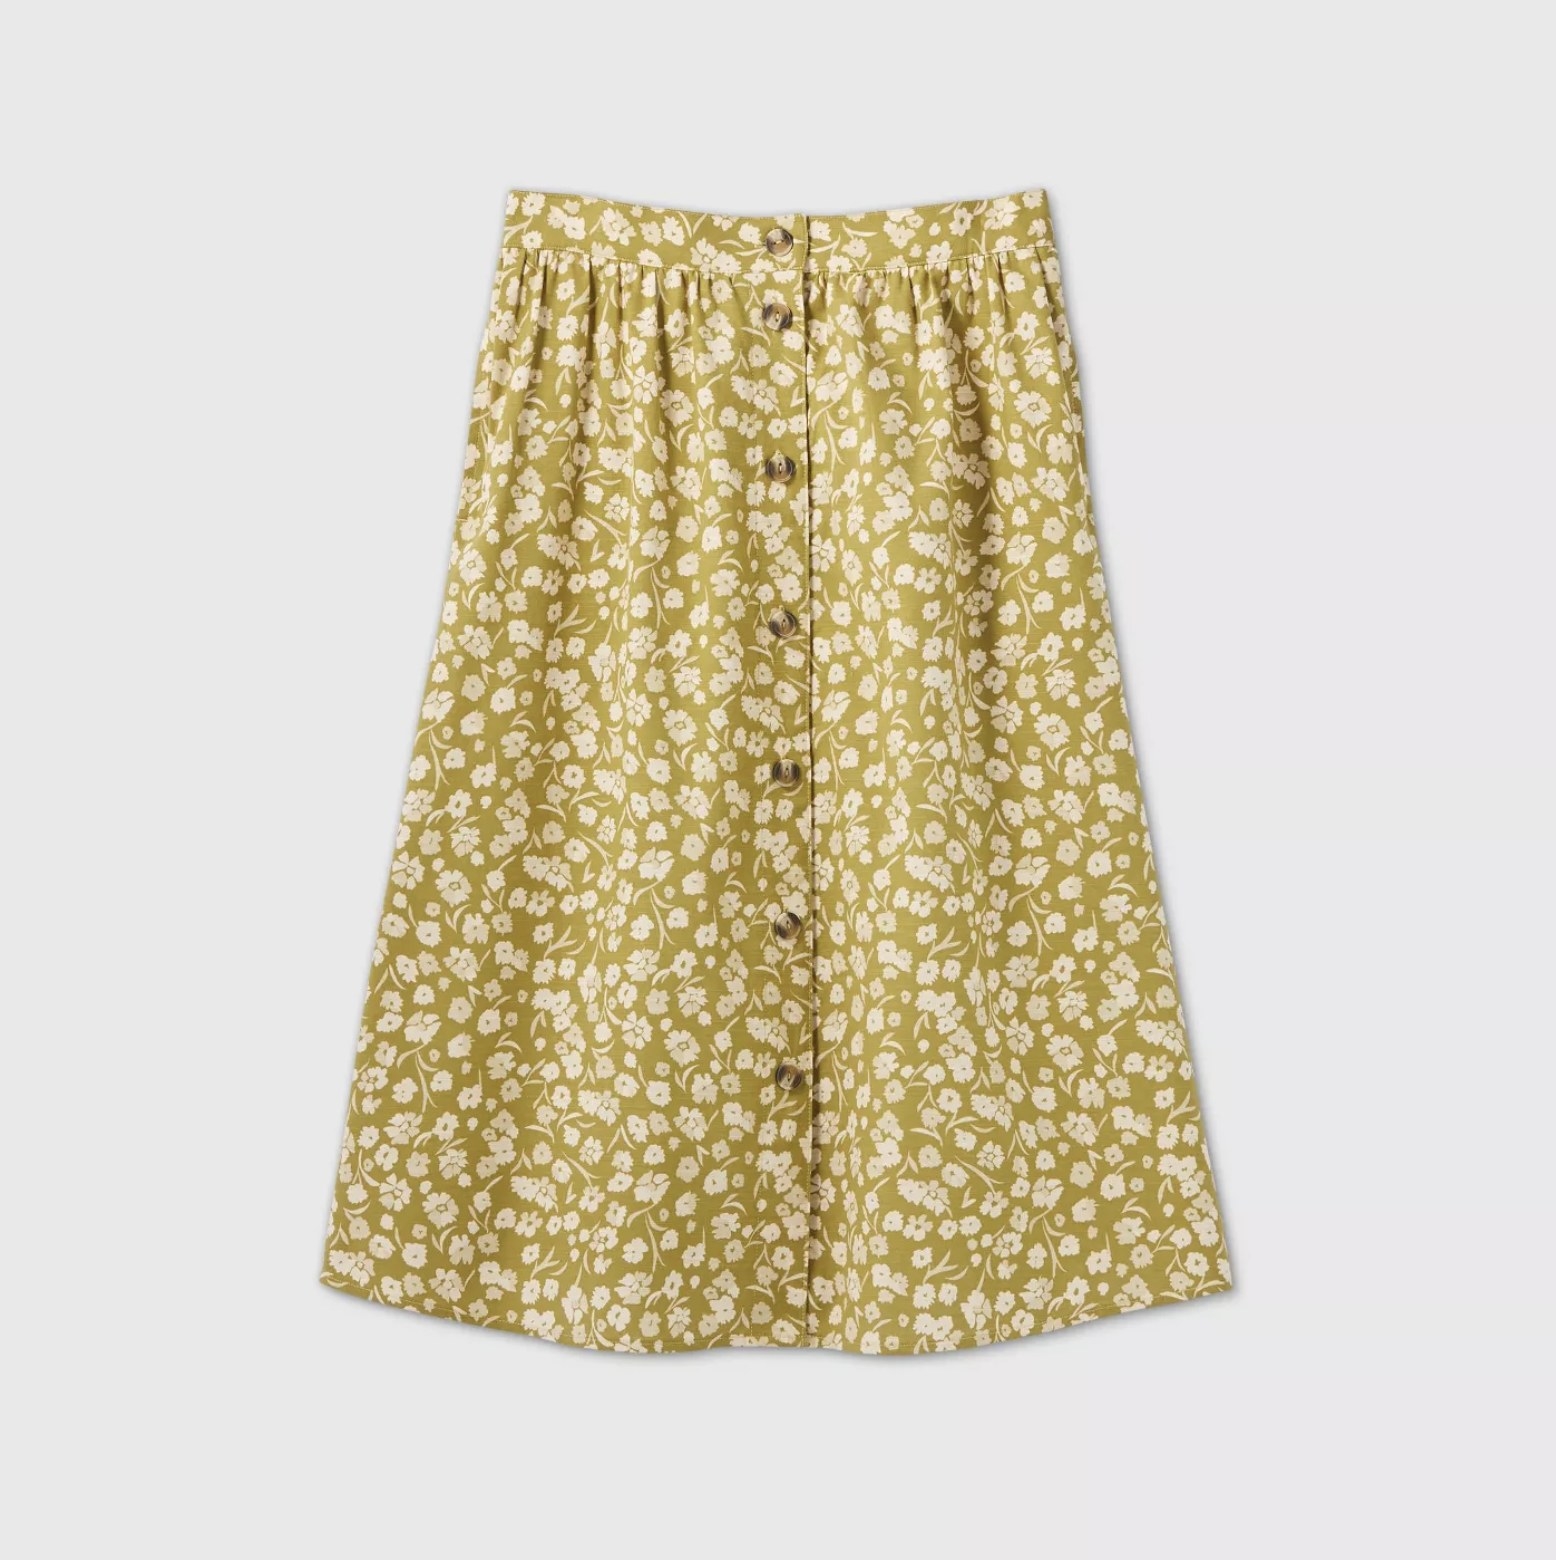 The midi-length, mid-rise yellow/green skirt with buttons down the front and cream flowers on it 